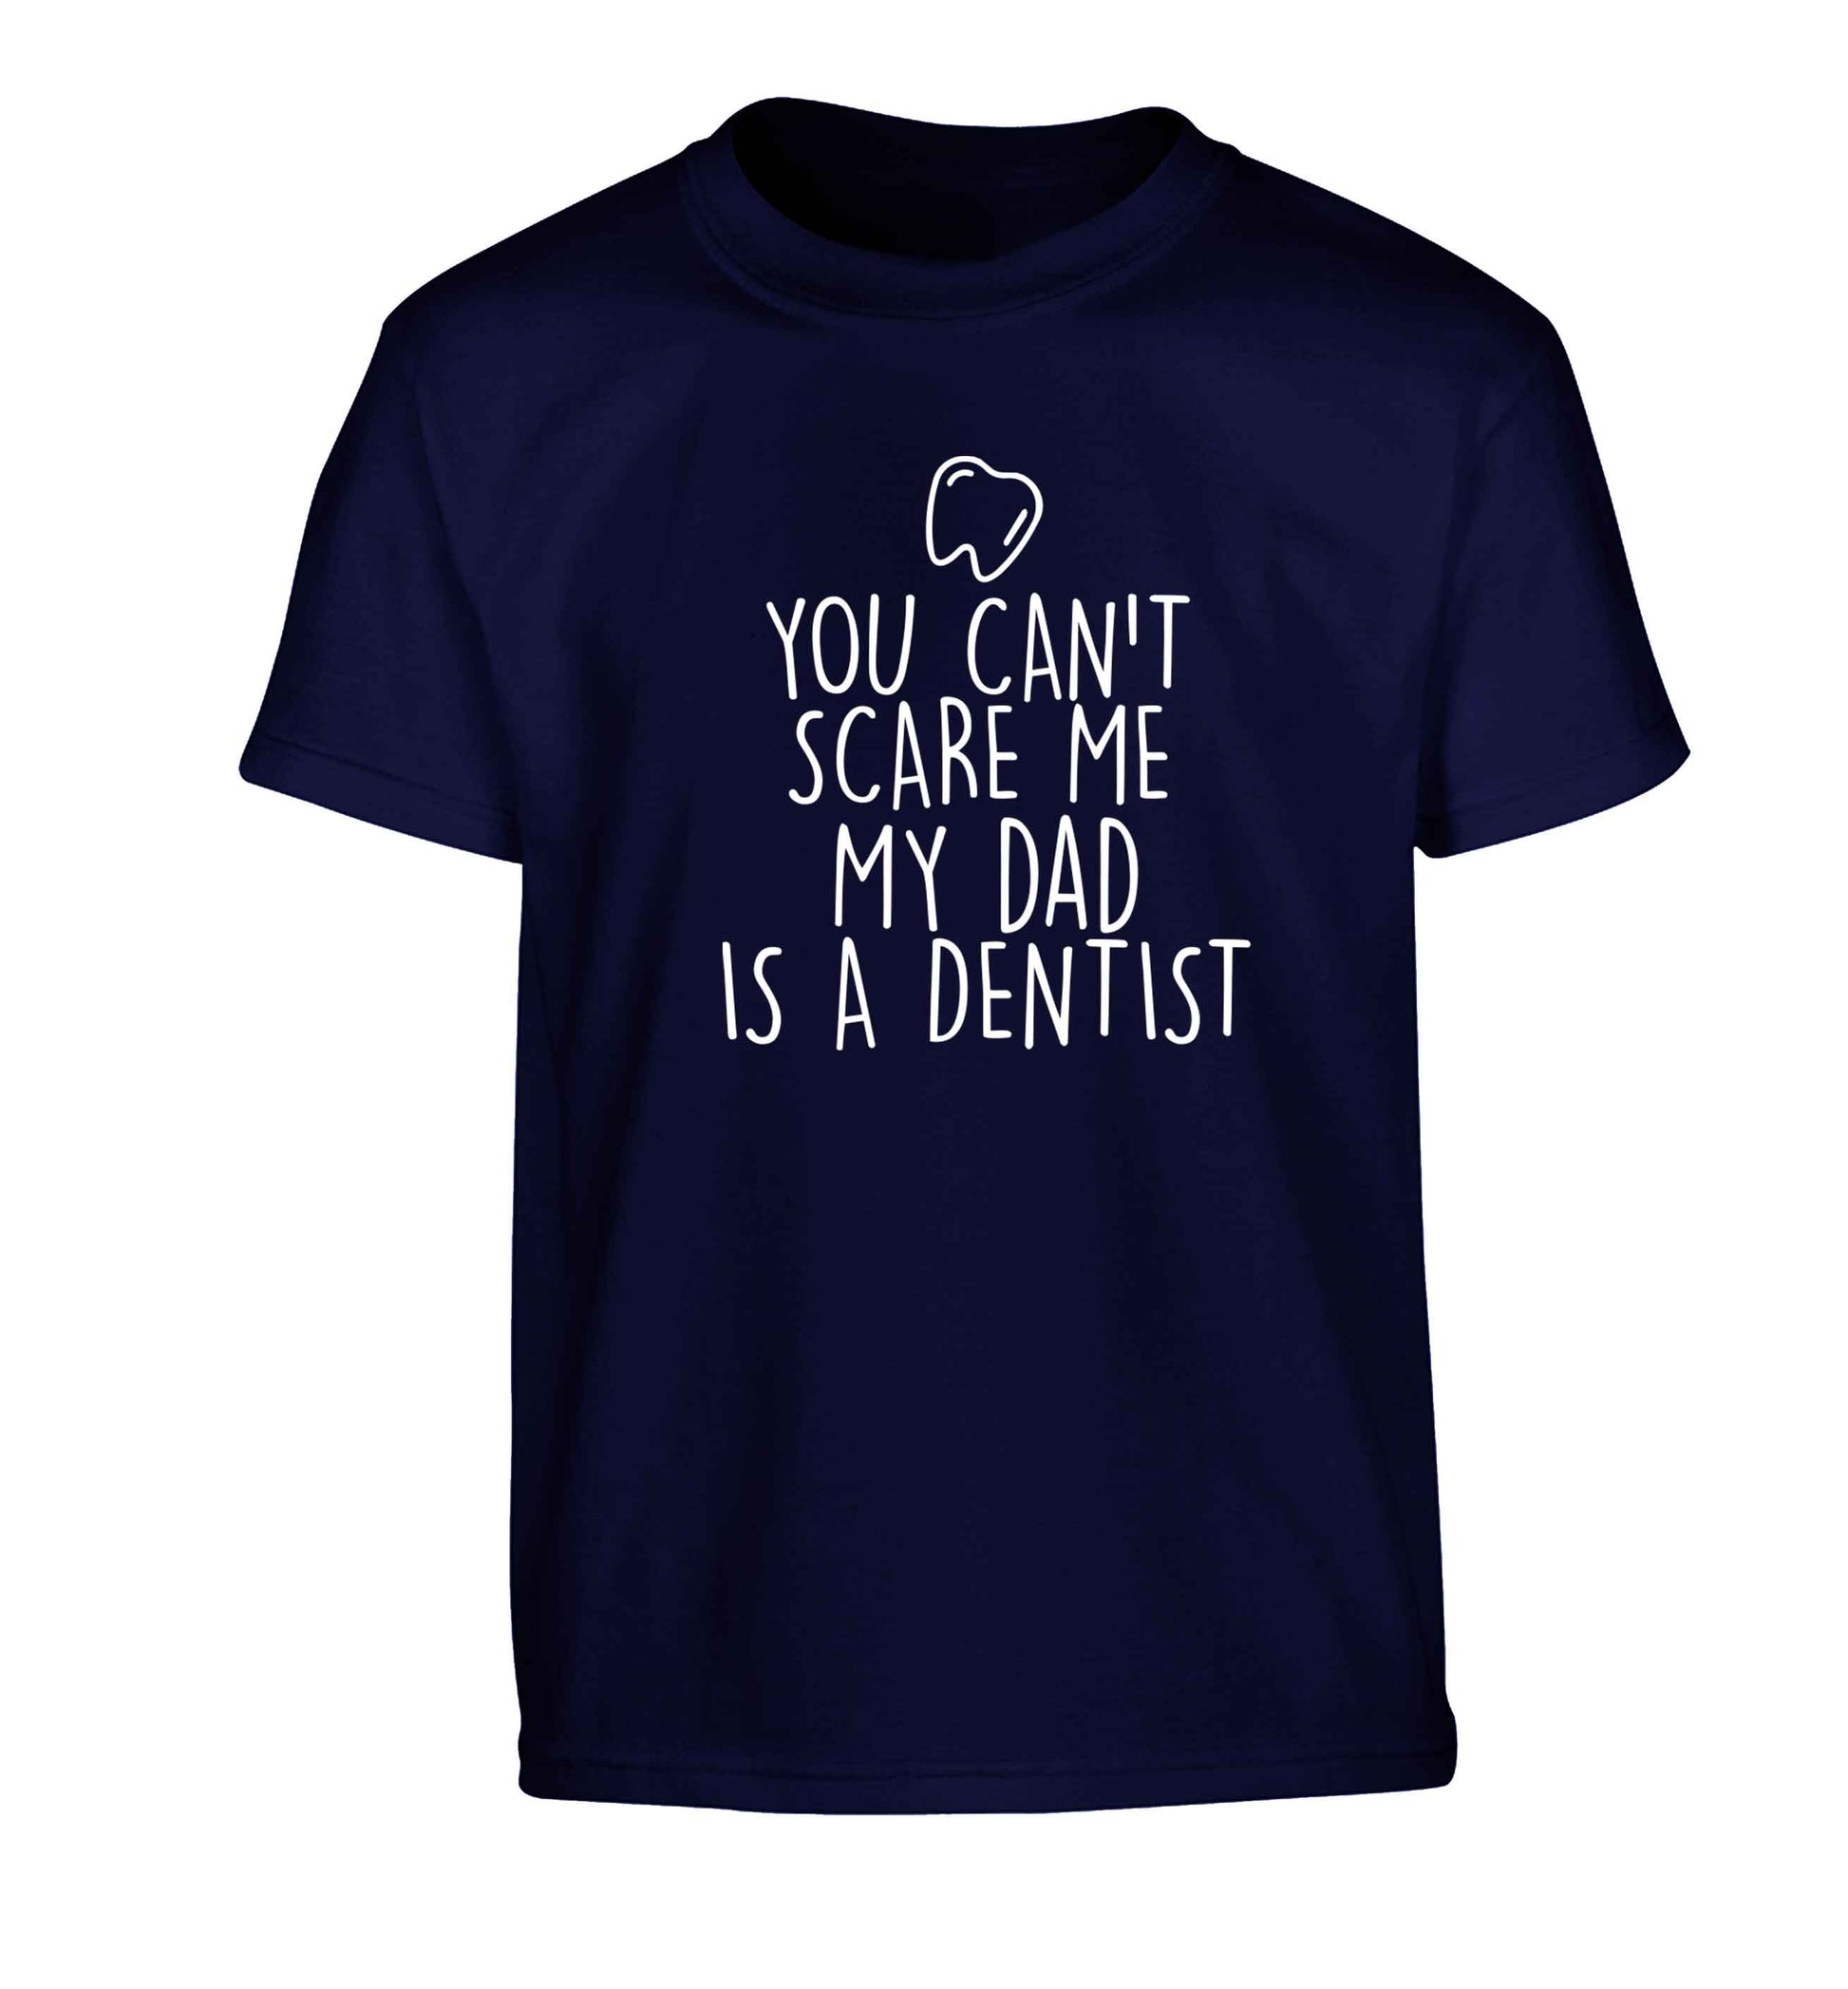 You can't scare me my dad is a dentist Children's navy Tshirt 12-13 Years